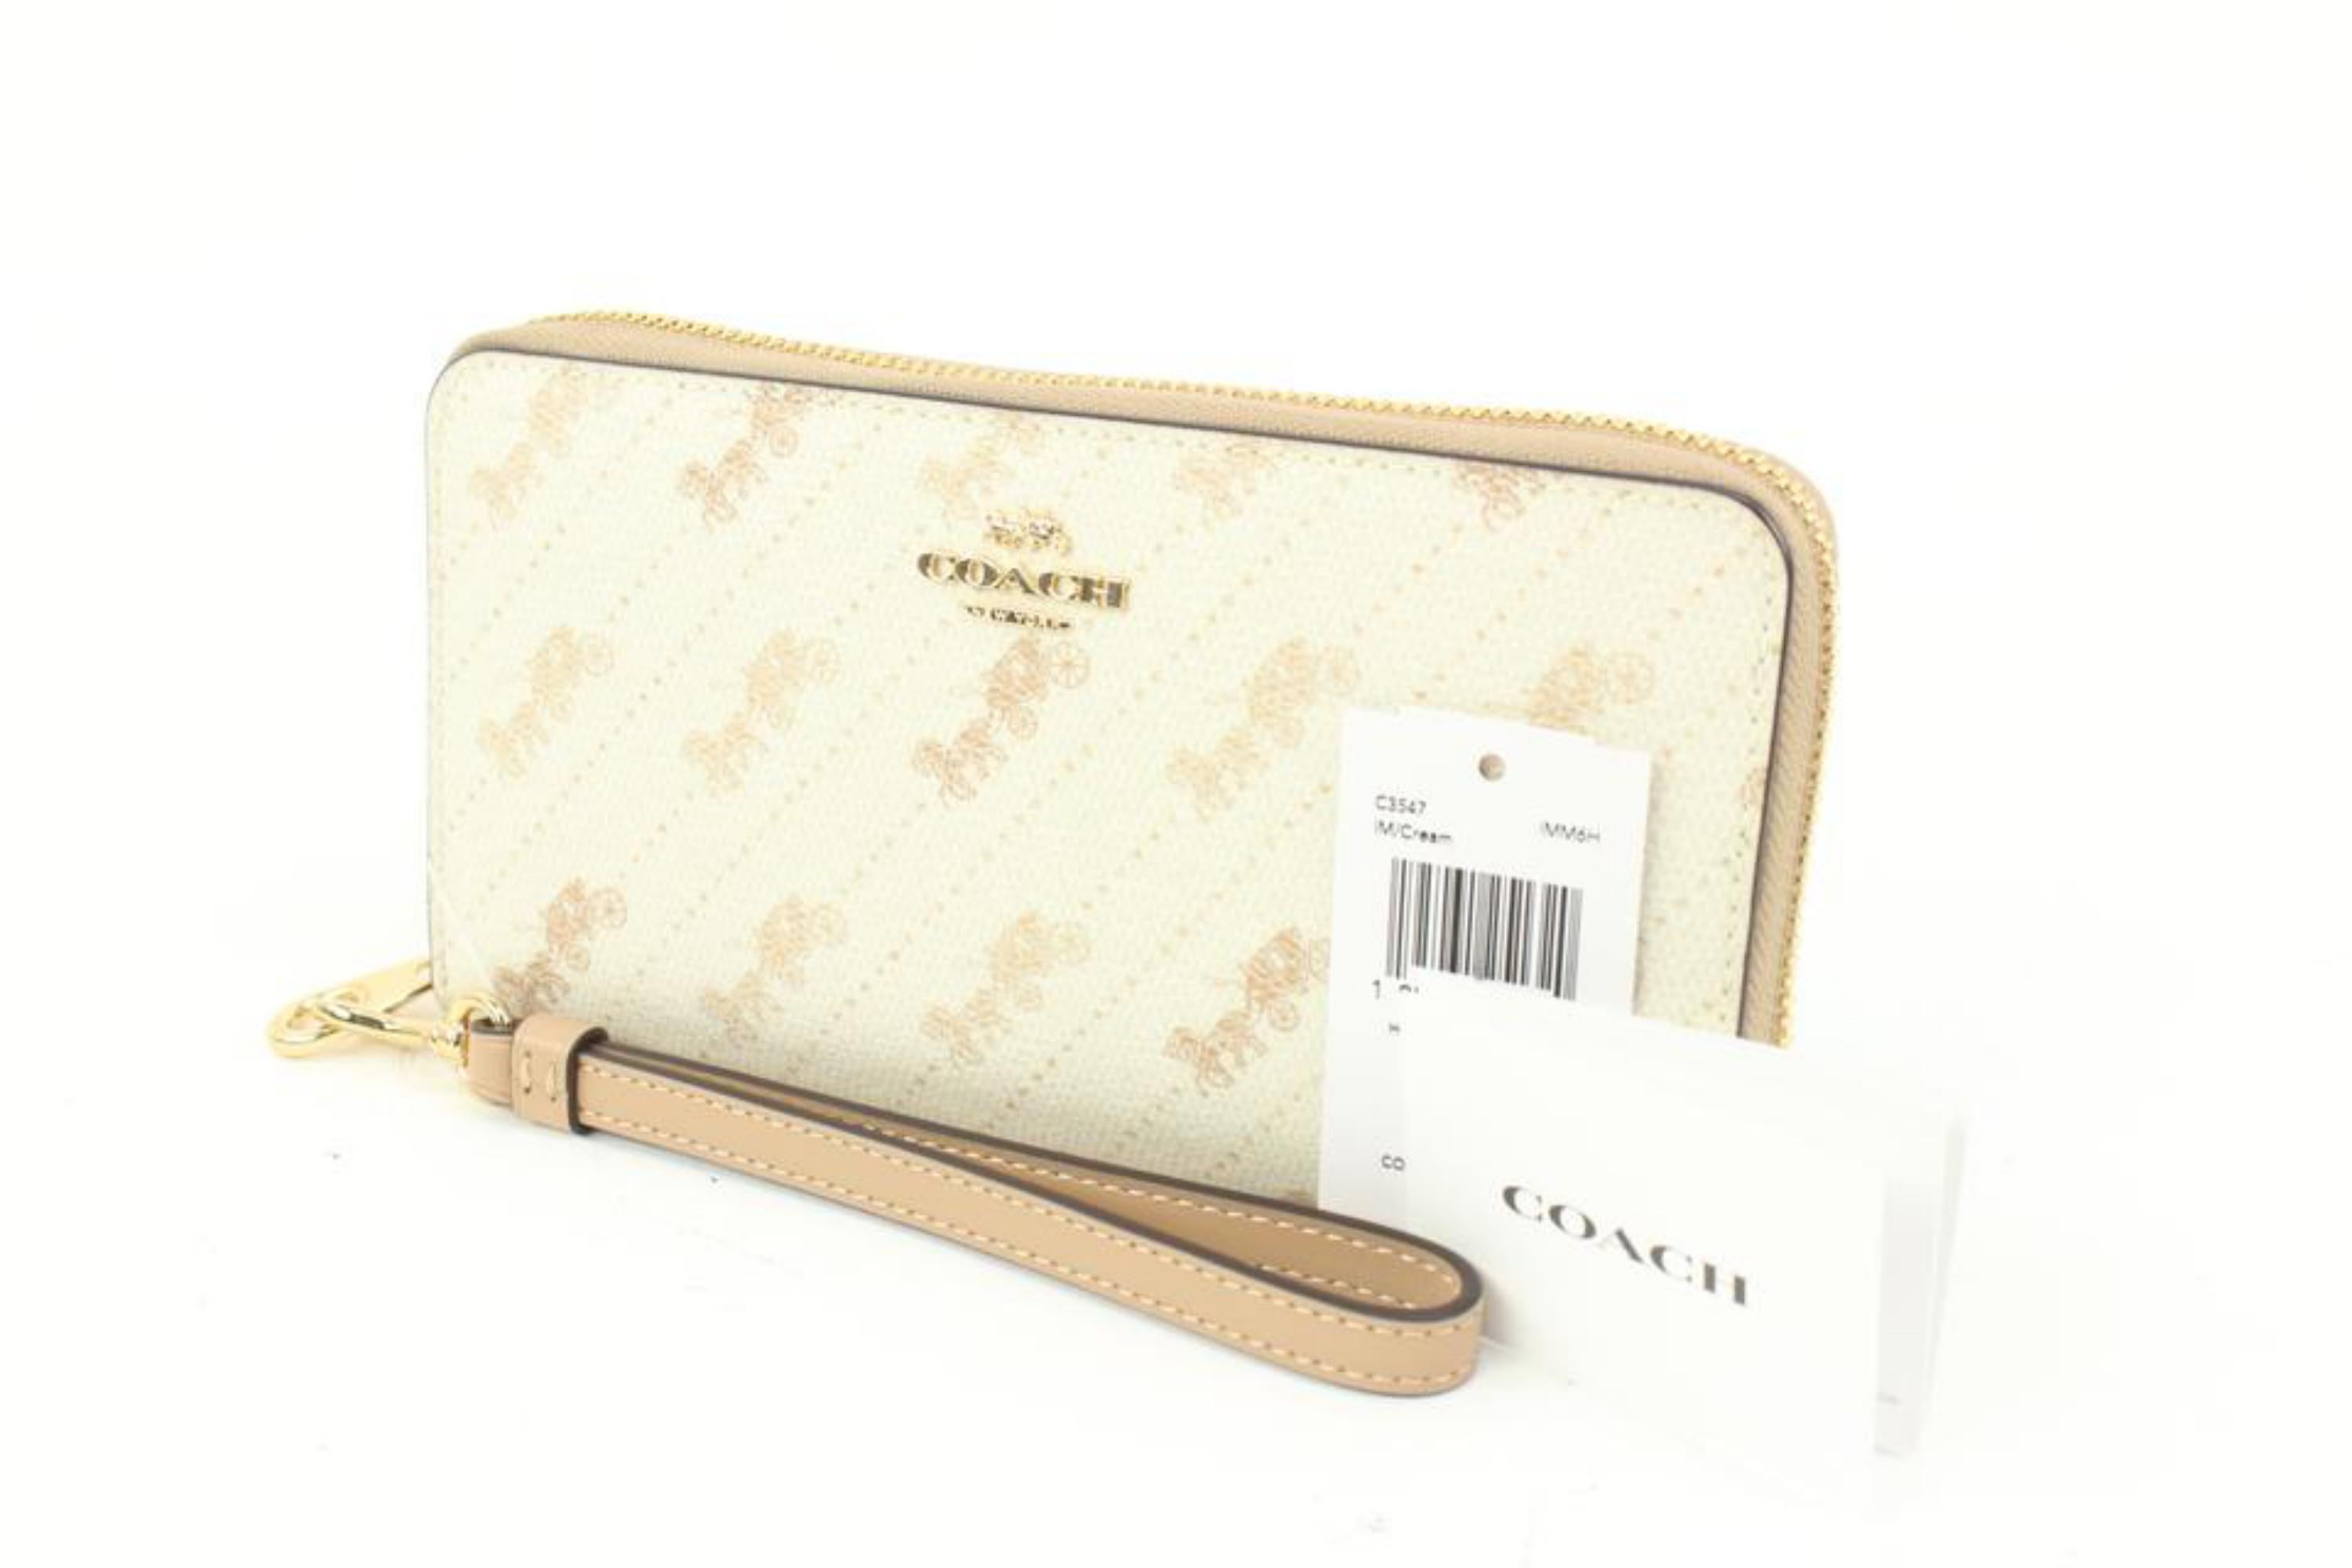 Coach FC3547 C3547 Cream Horse and Carriage Dot Print Long Zip Around 1co419
Date Code/Serial Number: B2180 C3557
Made In: Vietnam
Measurements: Length:  7.5